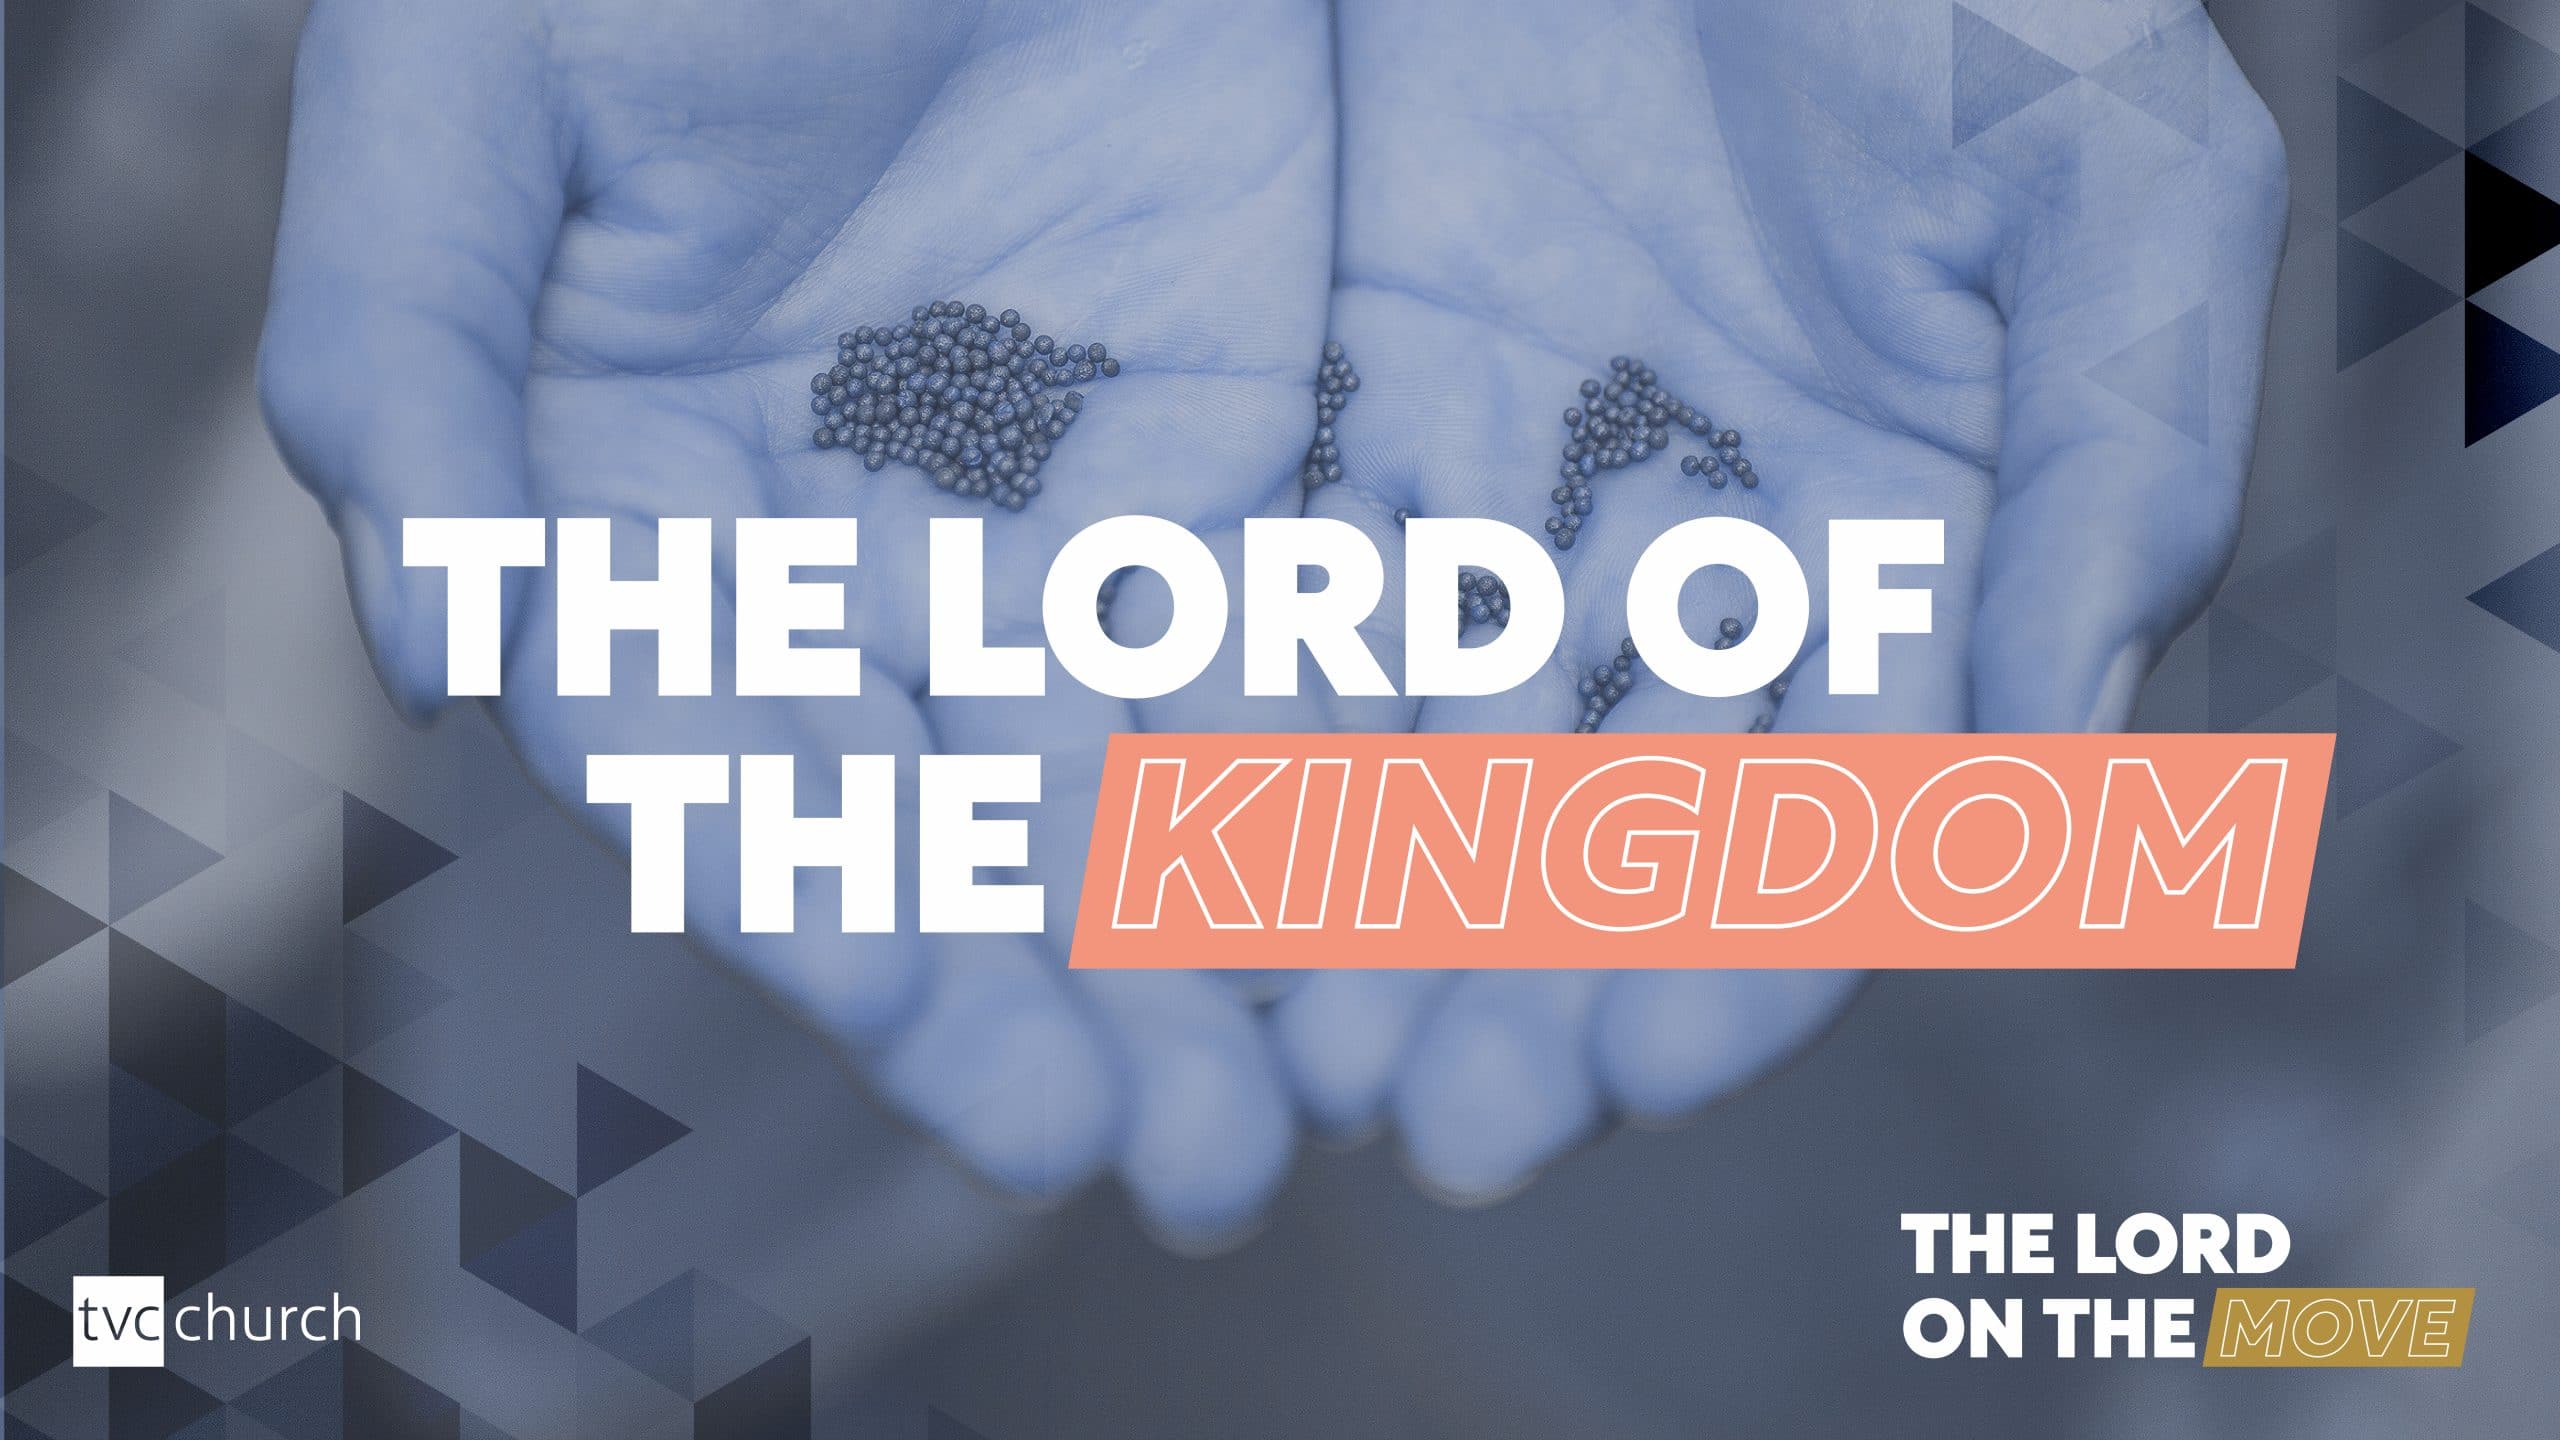 The Lord of the Kingdom